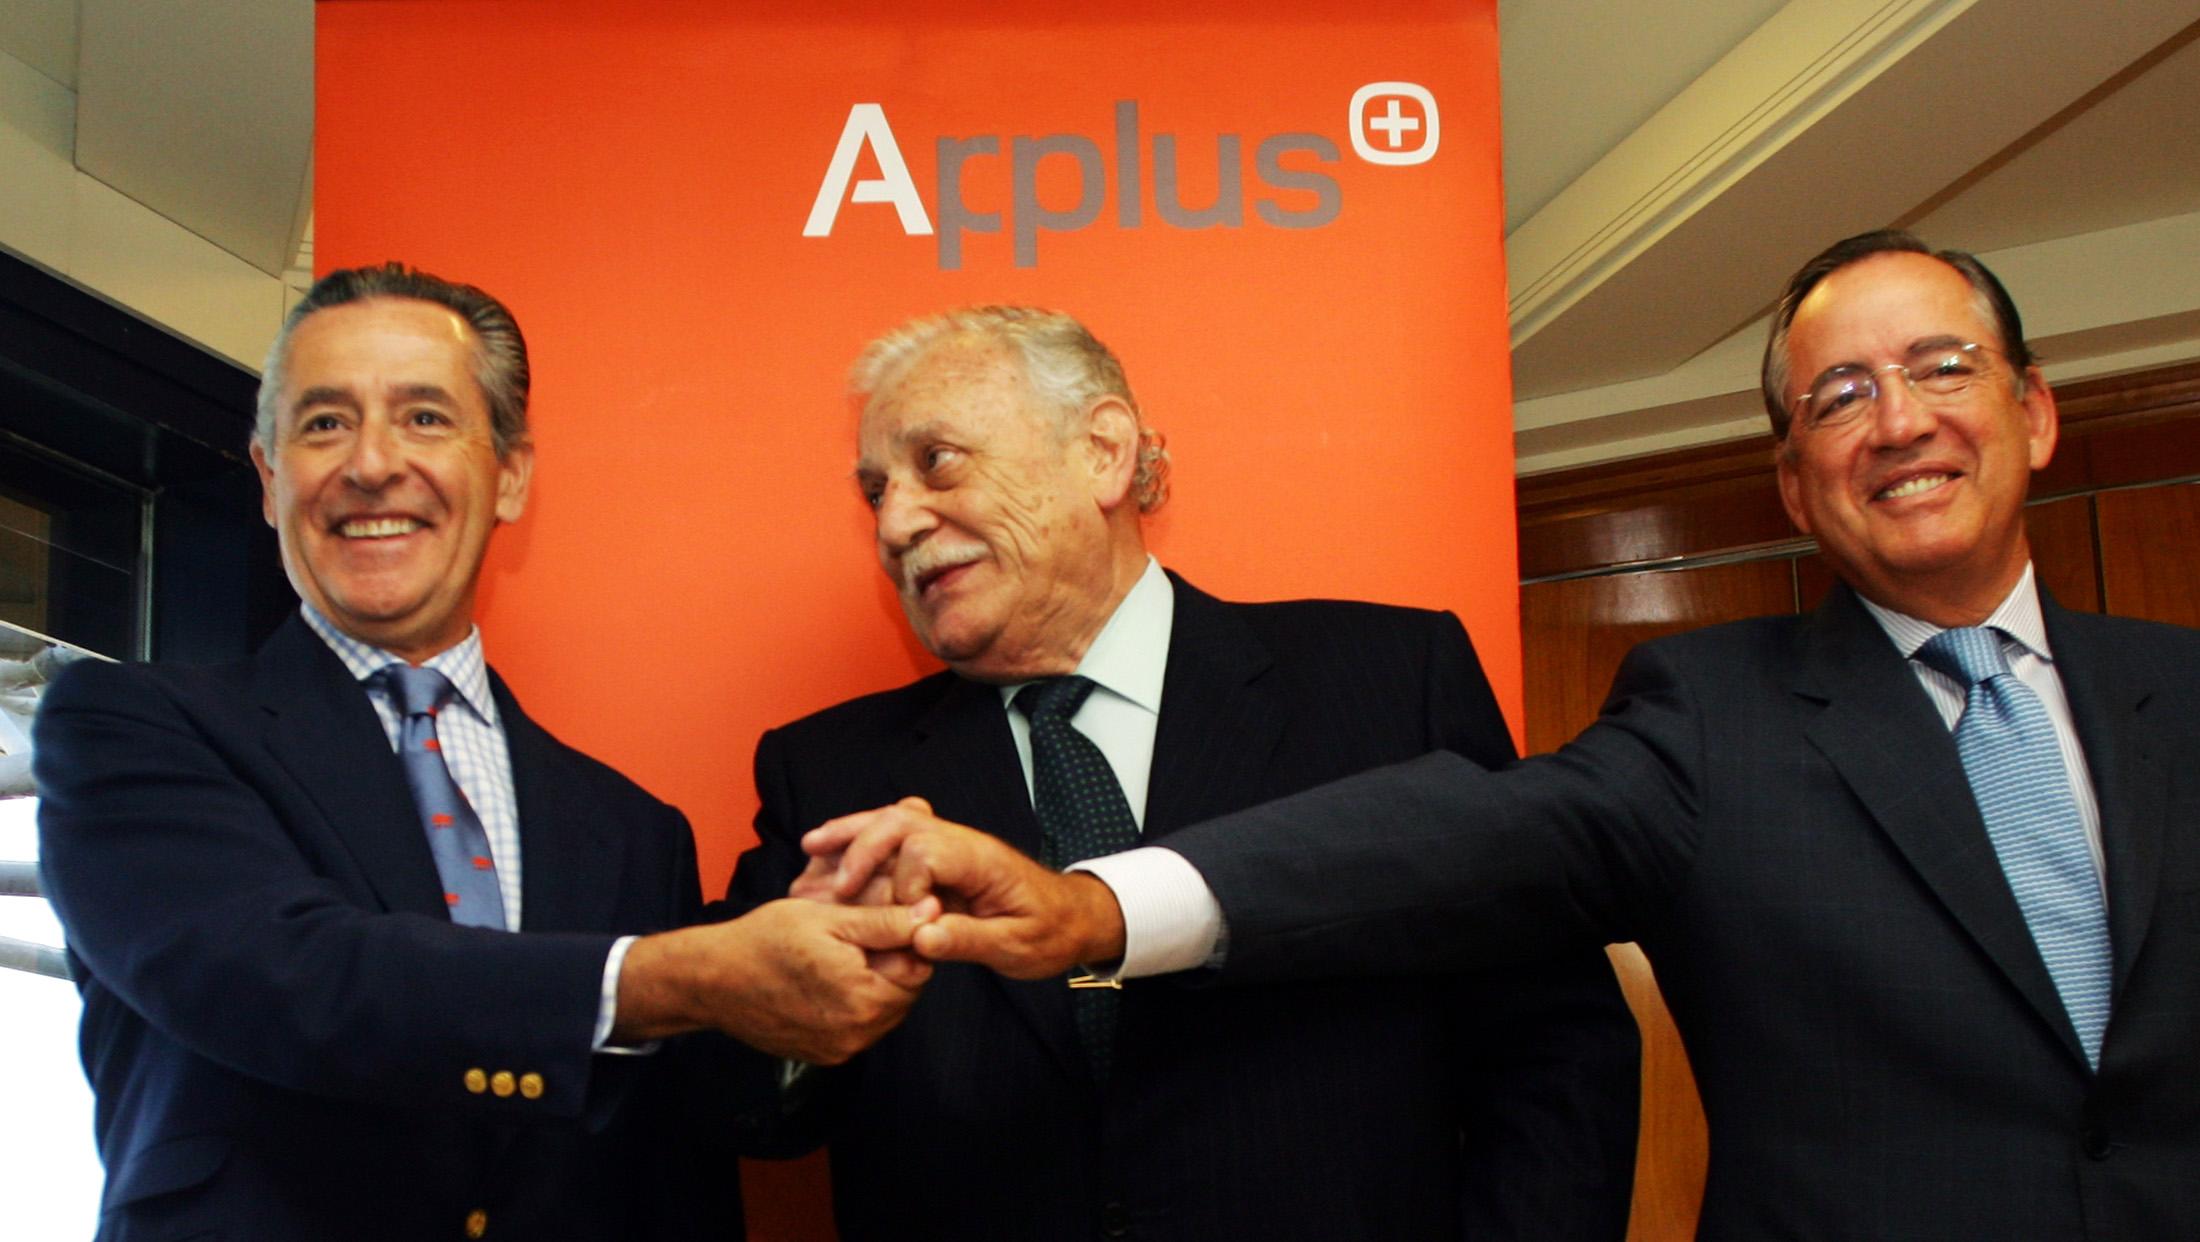 Spanish savings bank Caja Madrid's Chairman Miguel Blesa (L), Spain's water treatment company Aguas de Barcelona's Chairman Ricardo Fornesa (C) and Spanish electricity company Union Fenosa's Chairman Antonio Basagoiti join hands before a news conference in Madrid July 28, 2005. Caja Madrid will buy a 19 percent stake in techonology and services joint venture Applus+, run by Union Fenosa and Aguas de Barcelona. REUTERS/Susana Vera  SV/LA